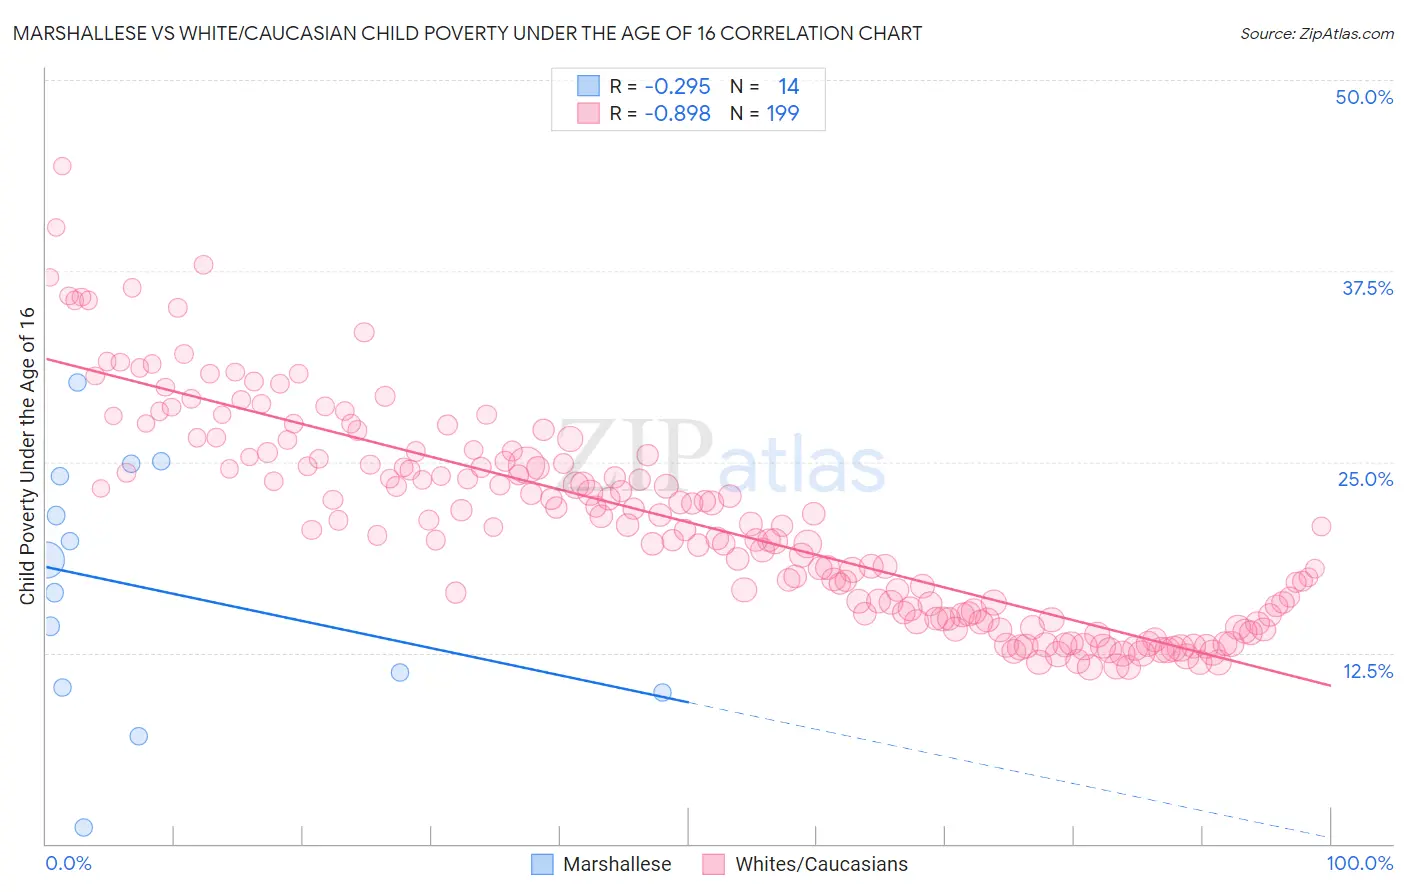 Marshallese vs White/Caucasian Child Poverty Under the Age of 16